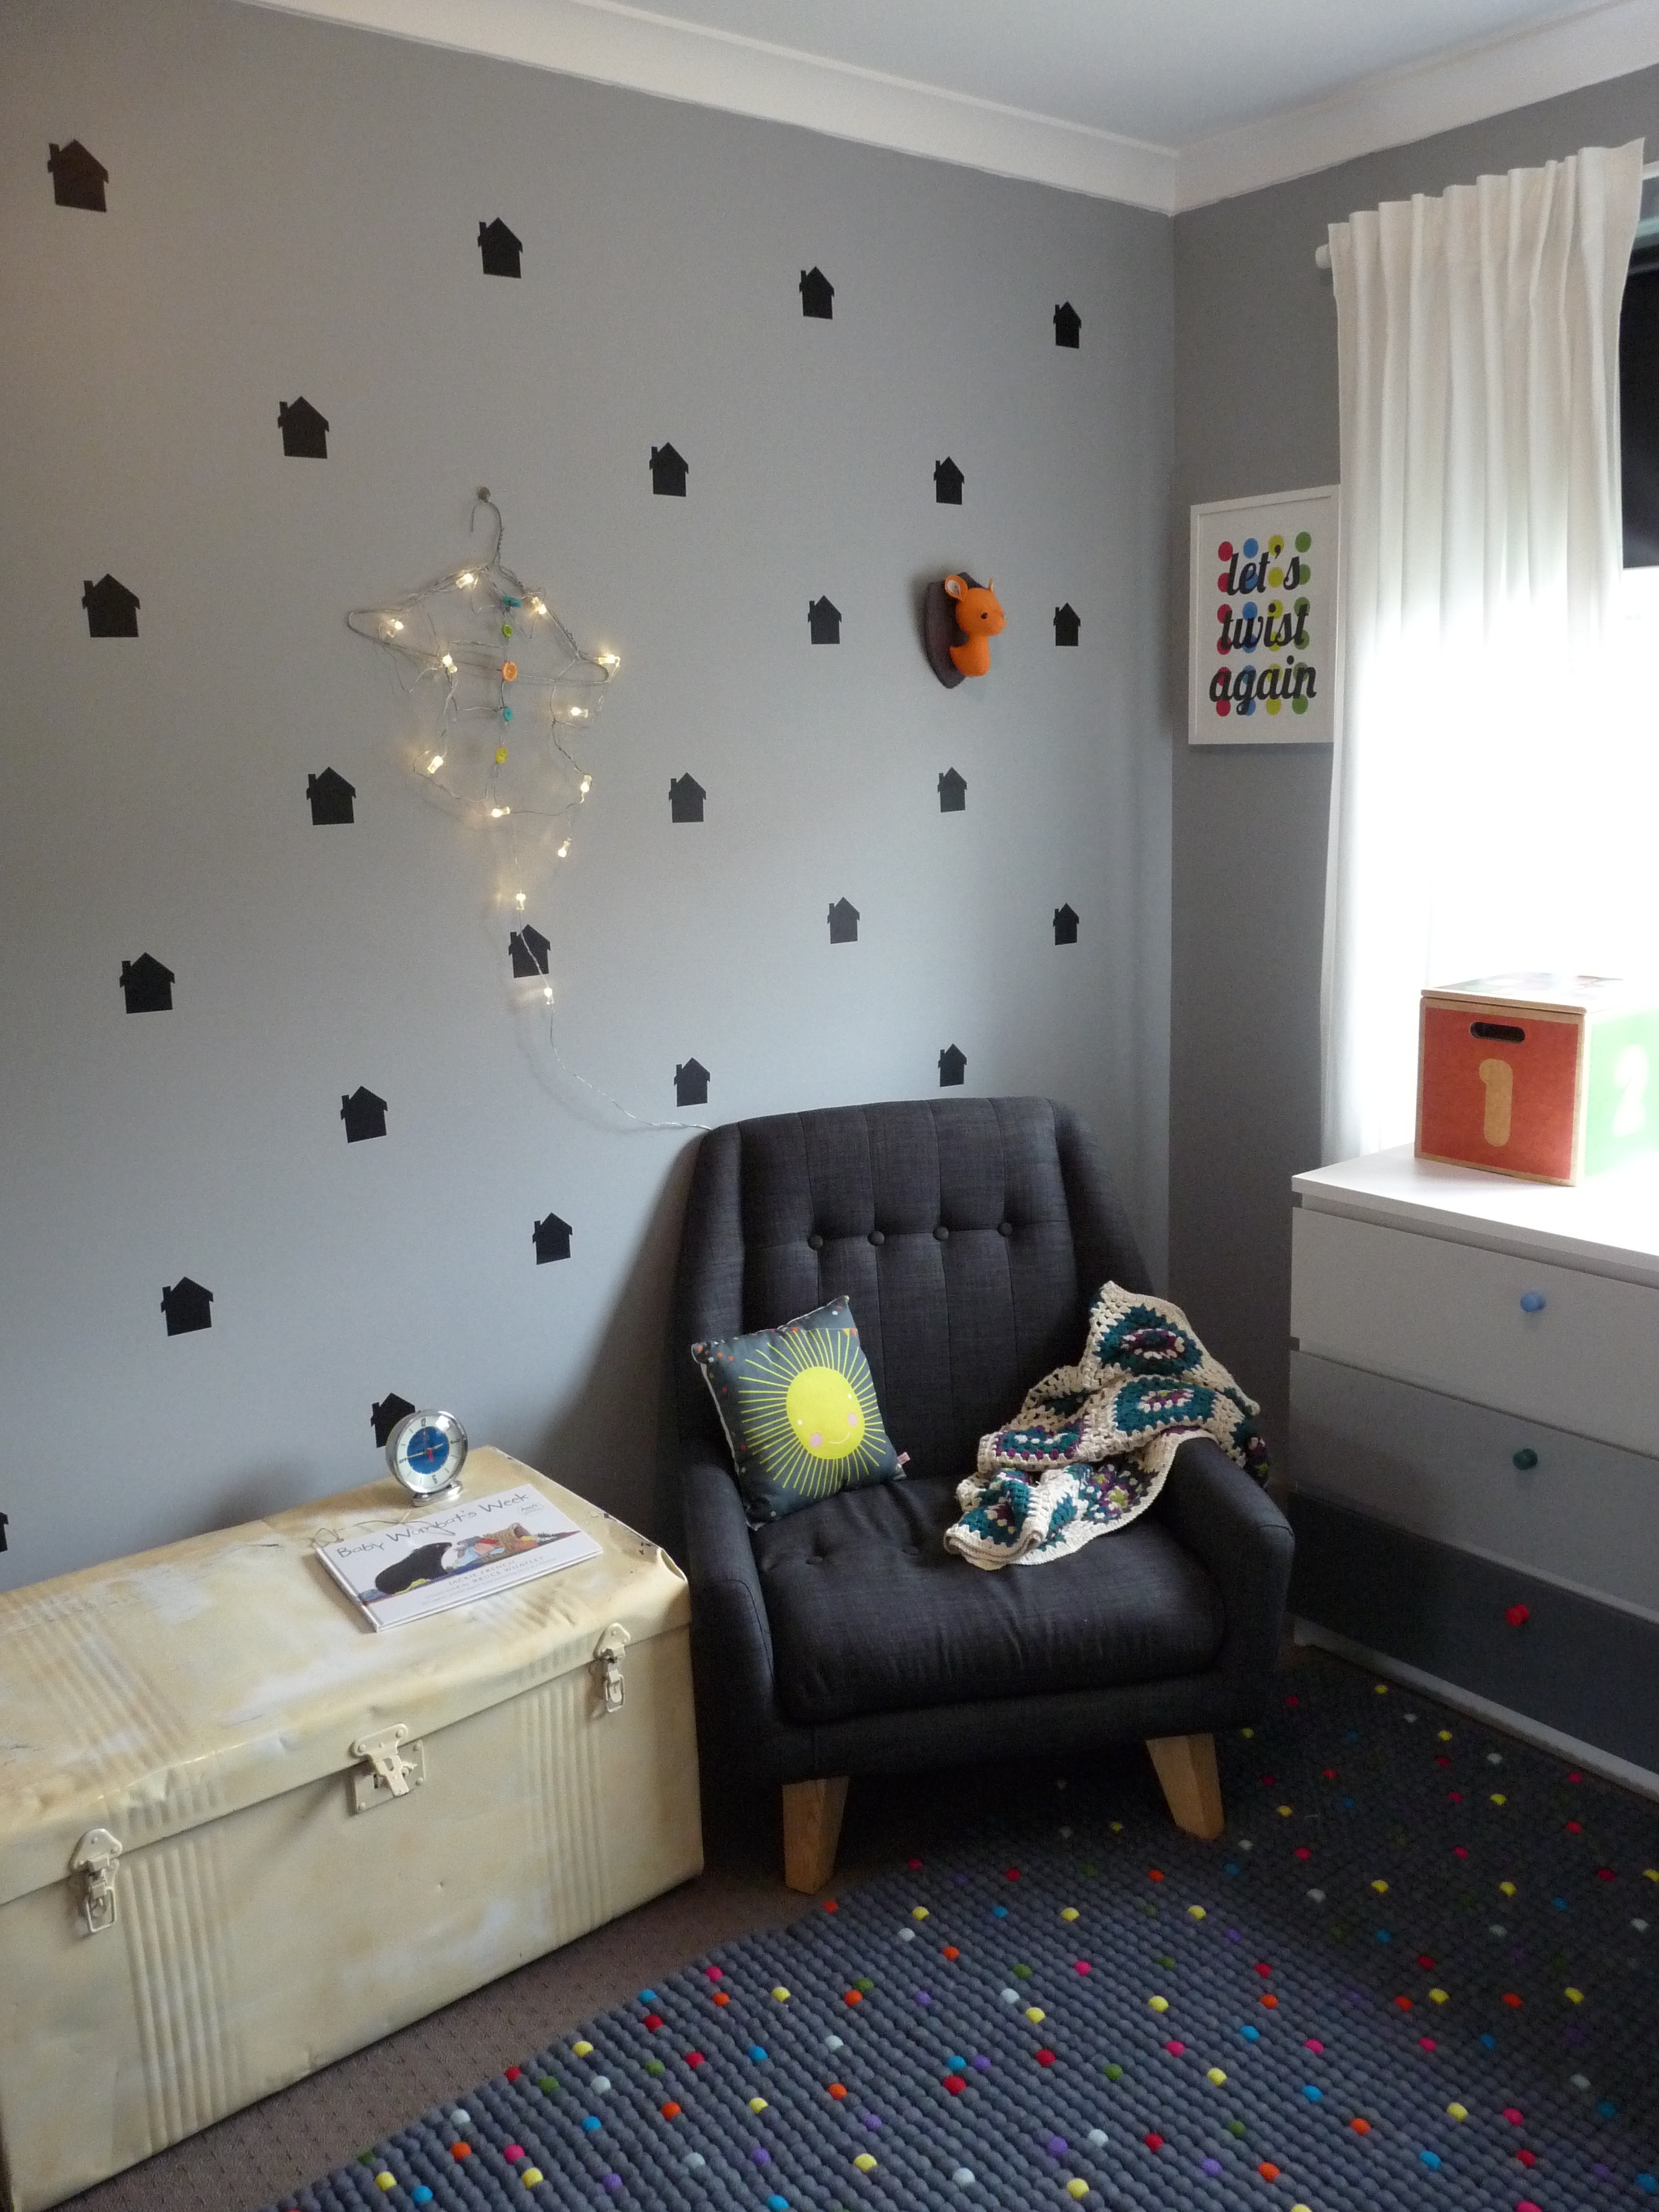 Little House Wall Decals in this Vibrant Nursery